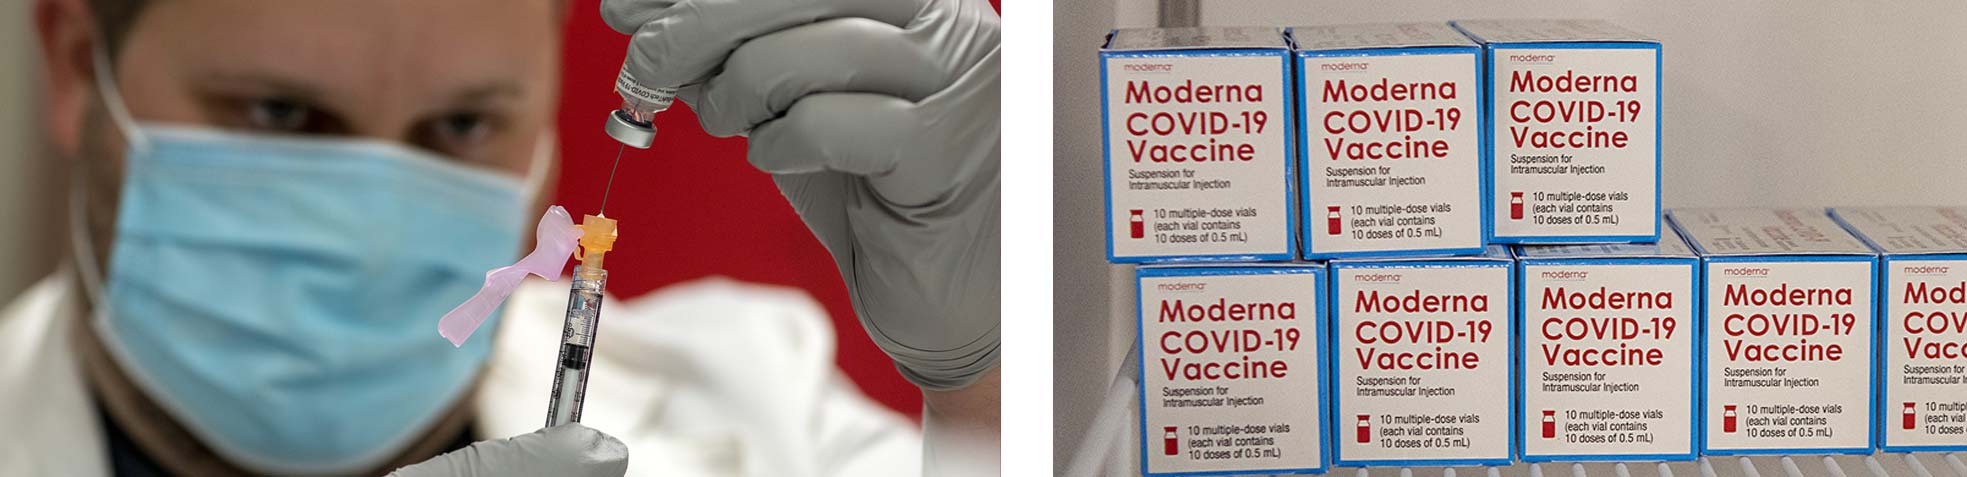 COVID-19 vaccine images